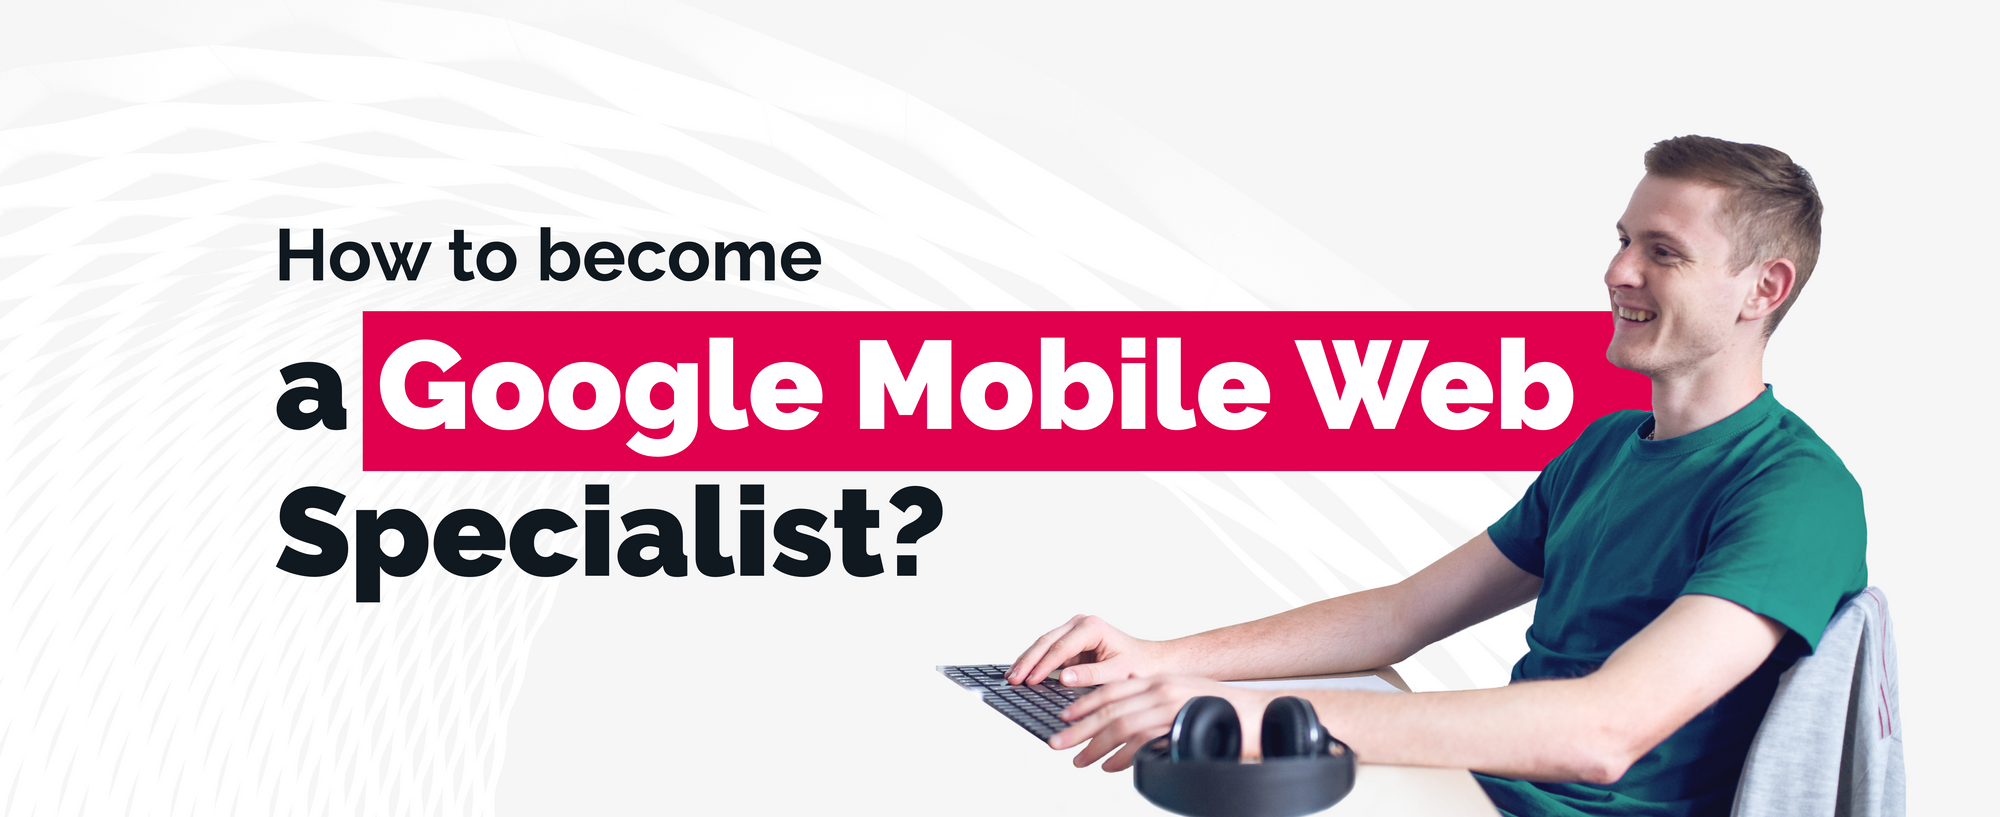 How to become a Google Mobile Web Specialist